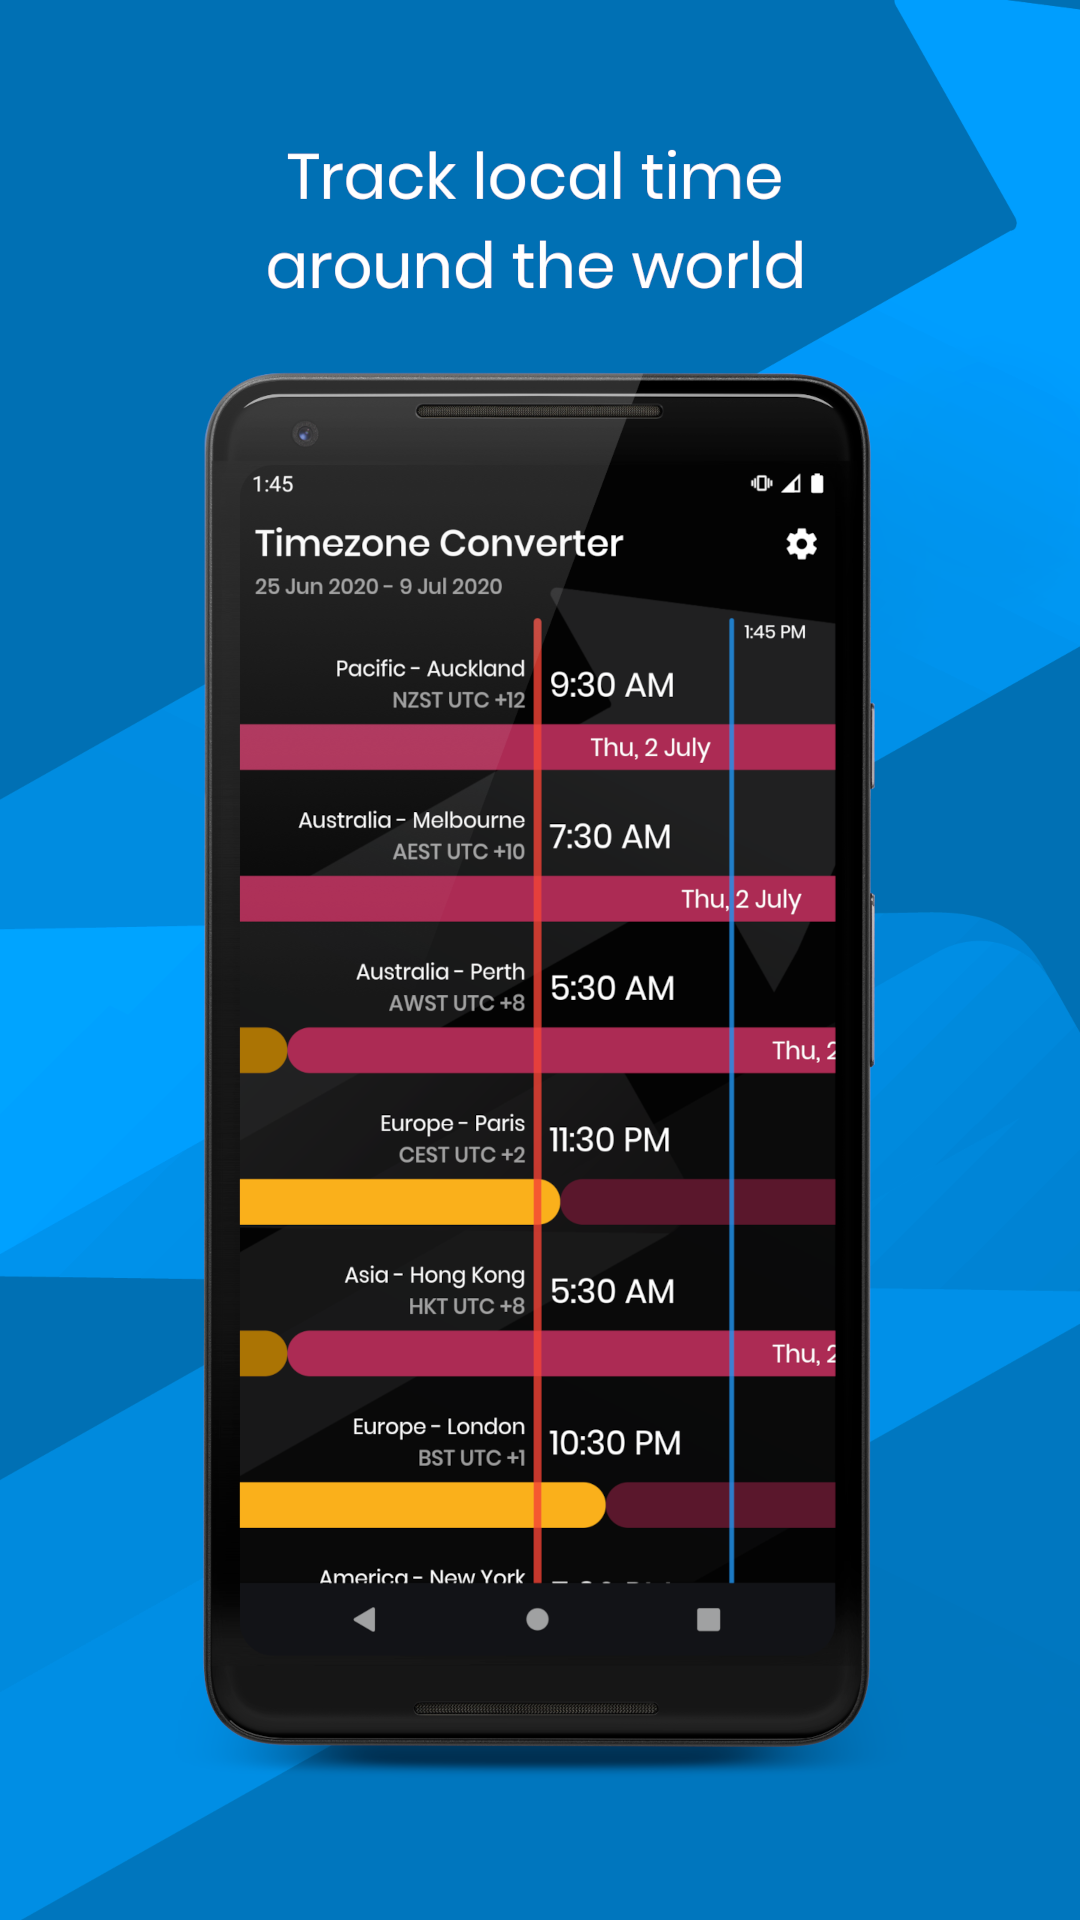 easy-timezone-converter-world-time-zone-tool-it-s-all-widgets